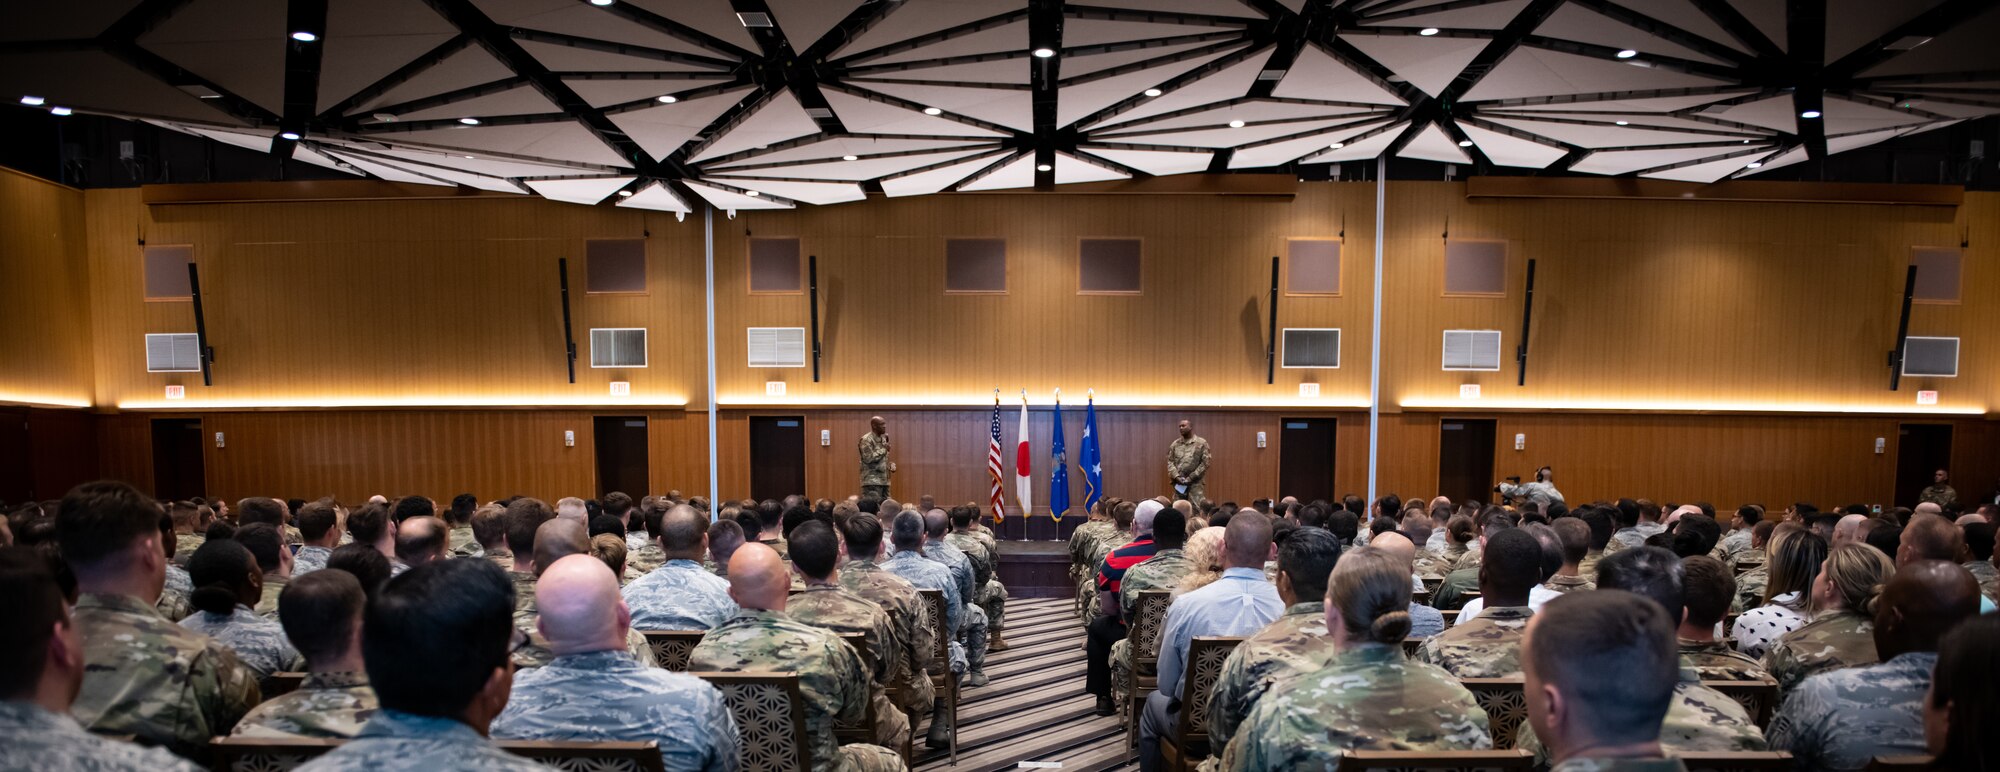 U.S. Air Force Airmen attend an all-call hosted by Gen. CQ Brown, Jr., Pacific Air Forces commander, at Kadena Air Base, Japan, Nov. 12, 2019. During the all-call, Brown recognized Airmen for their outstanding performance and took questions from the audience. (U.S. Air Force photo by Staff Sgt. Benjamin Raughton)